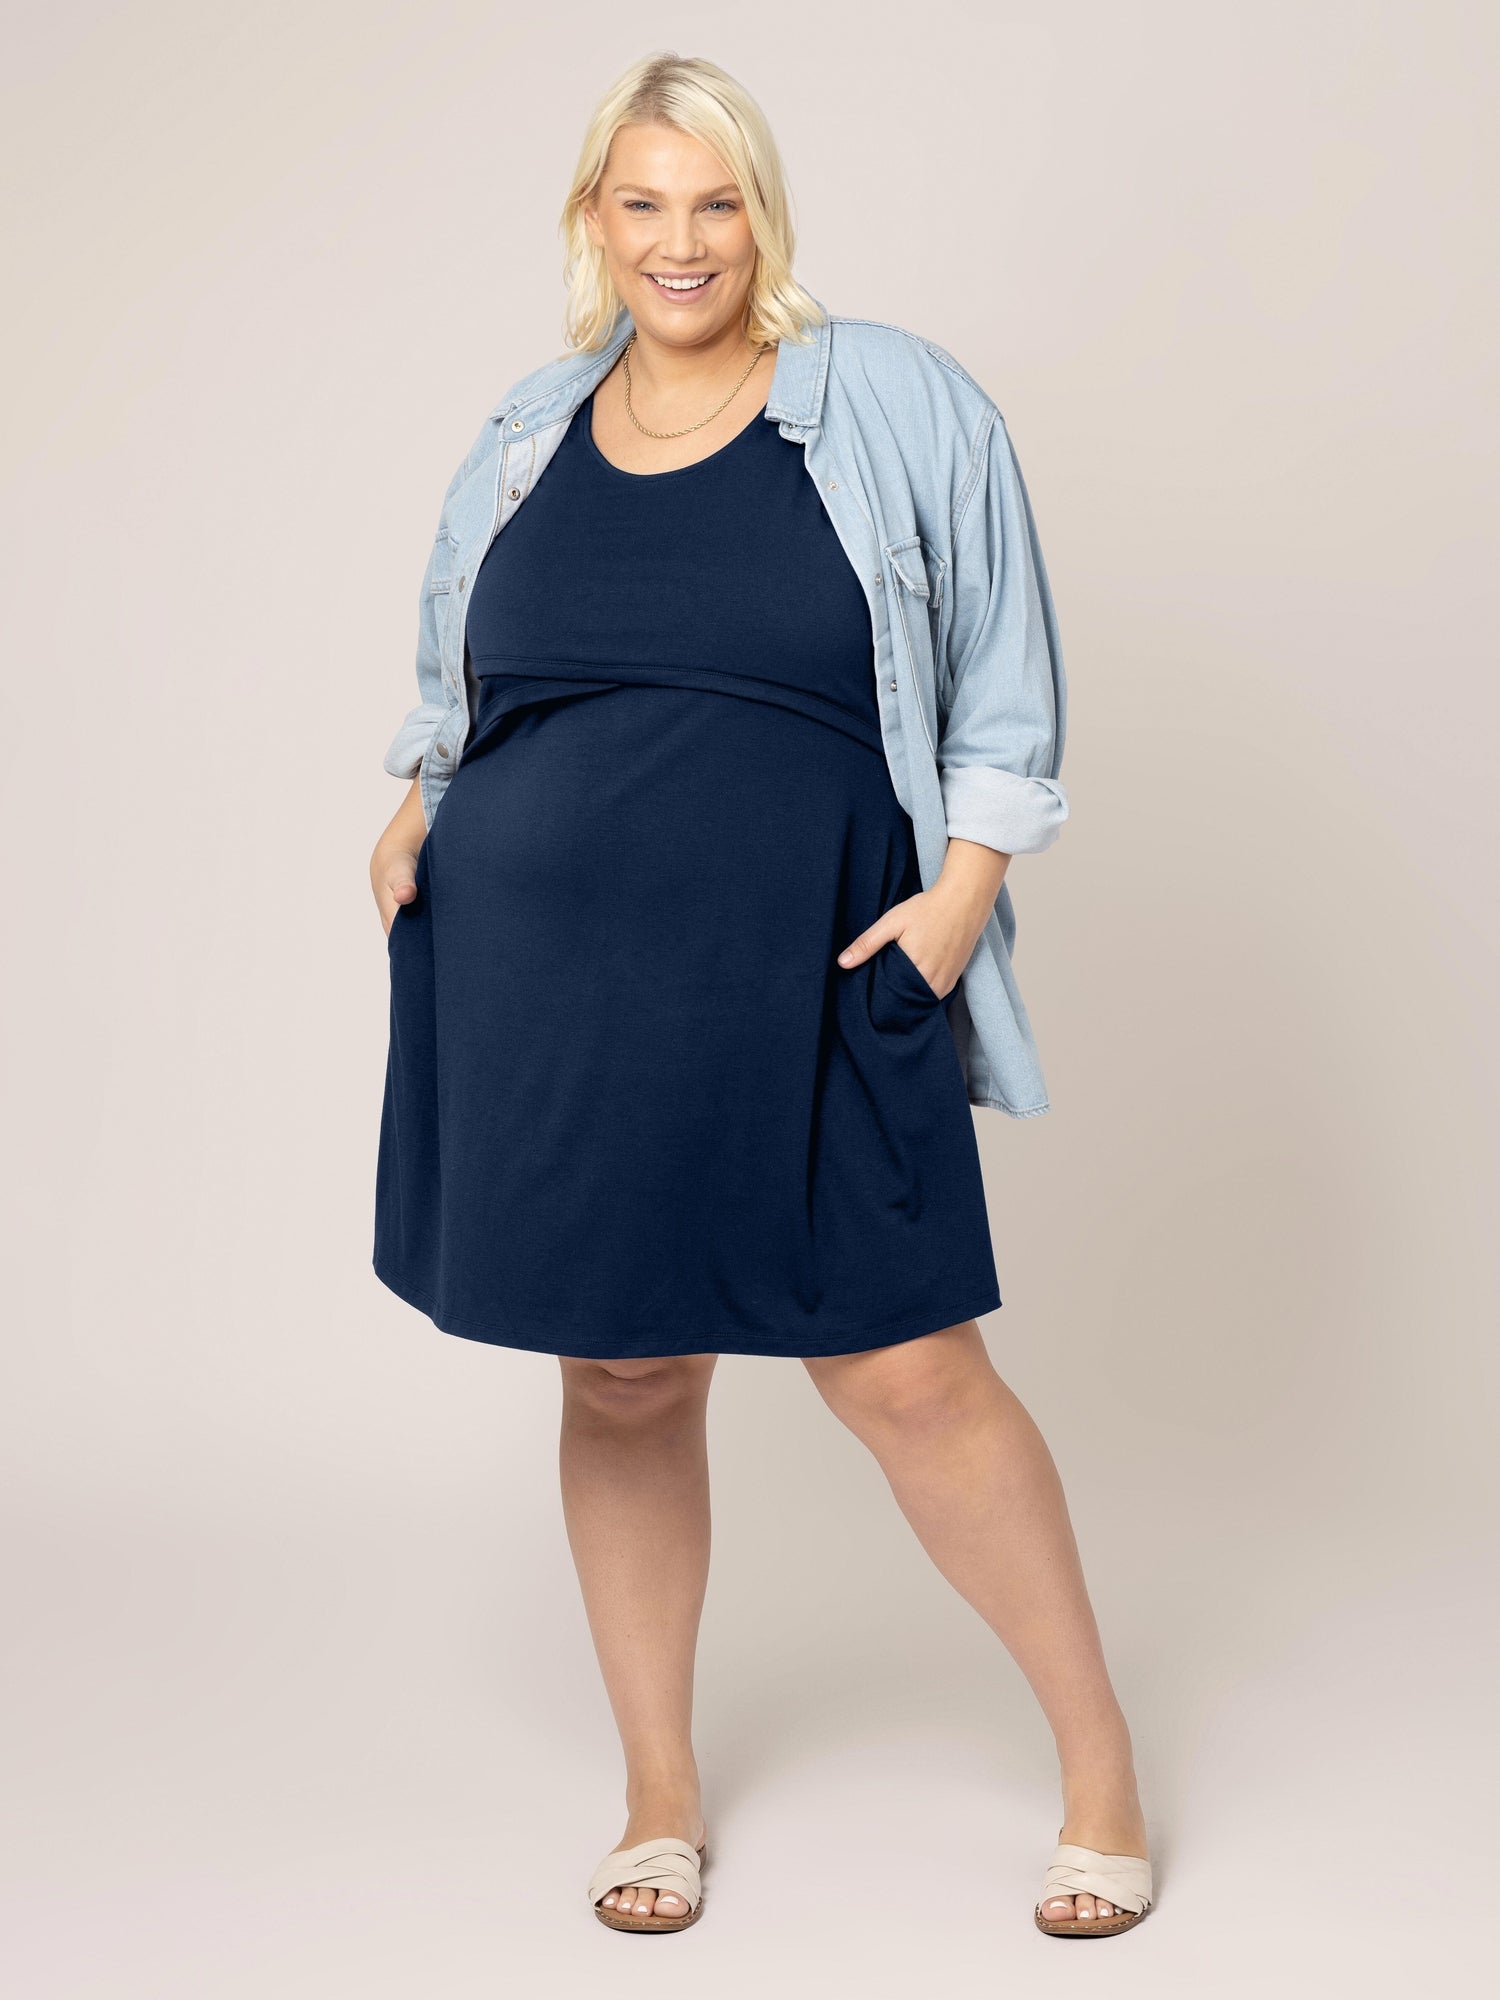 Full image of model wearing the Penelope Crossover Nursing Dress in navy, with hands in pockets, paired with denim jacket and sandals